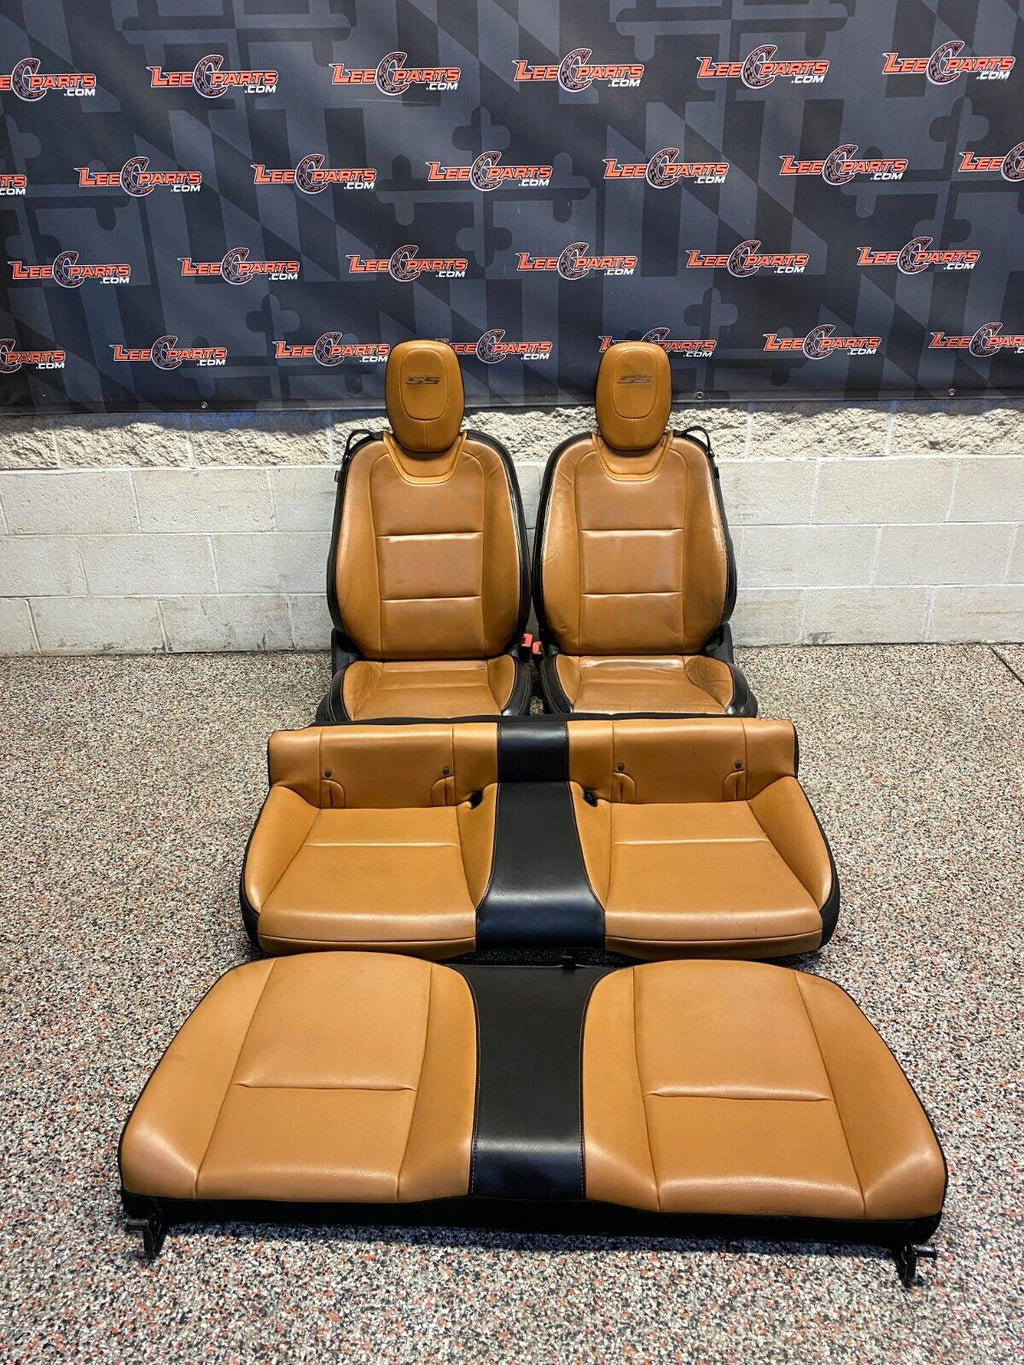 2013 CAMARO SS OEM SEAT SET FRONT REAR PEANUT BUTTER LEATHER SEATS SET USED